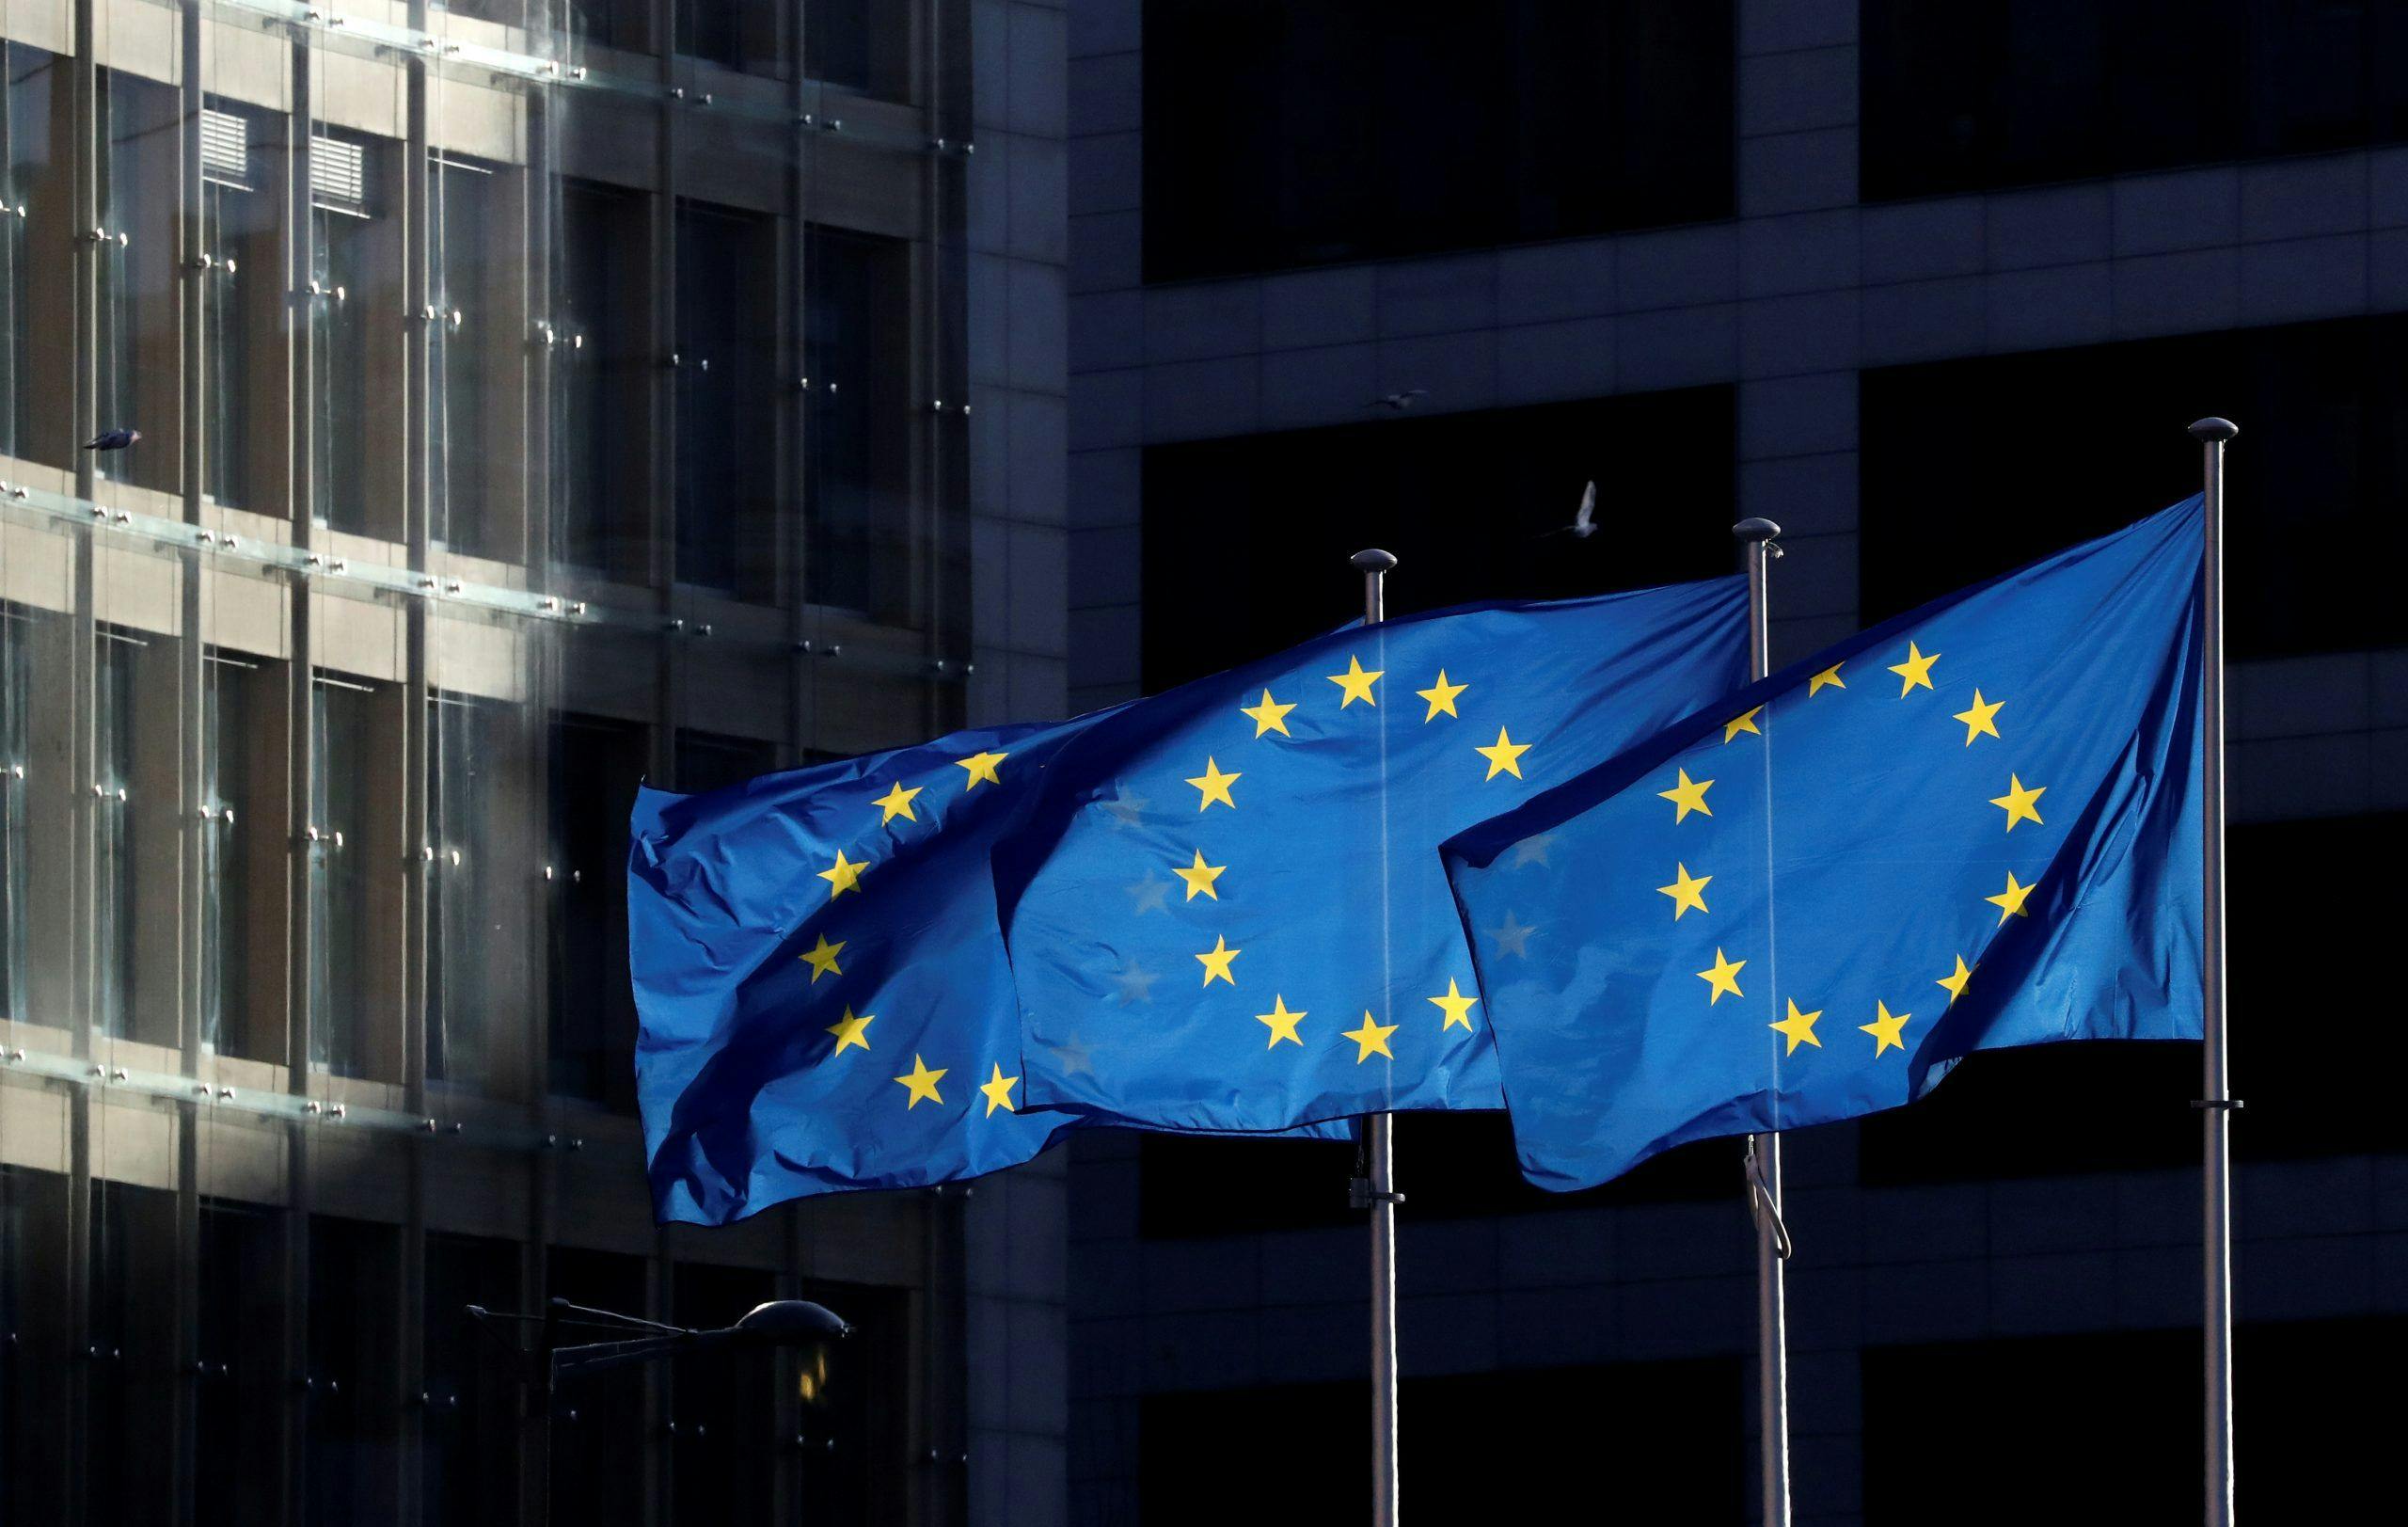 EU Steps in on Pricing, Offers Member States Aid to Negotiate